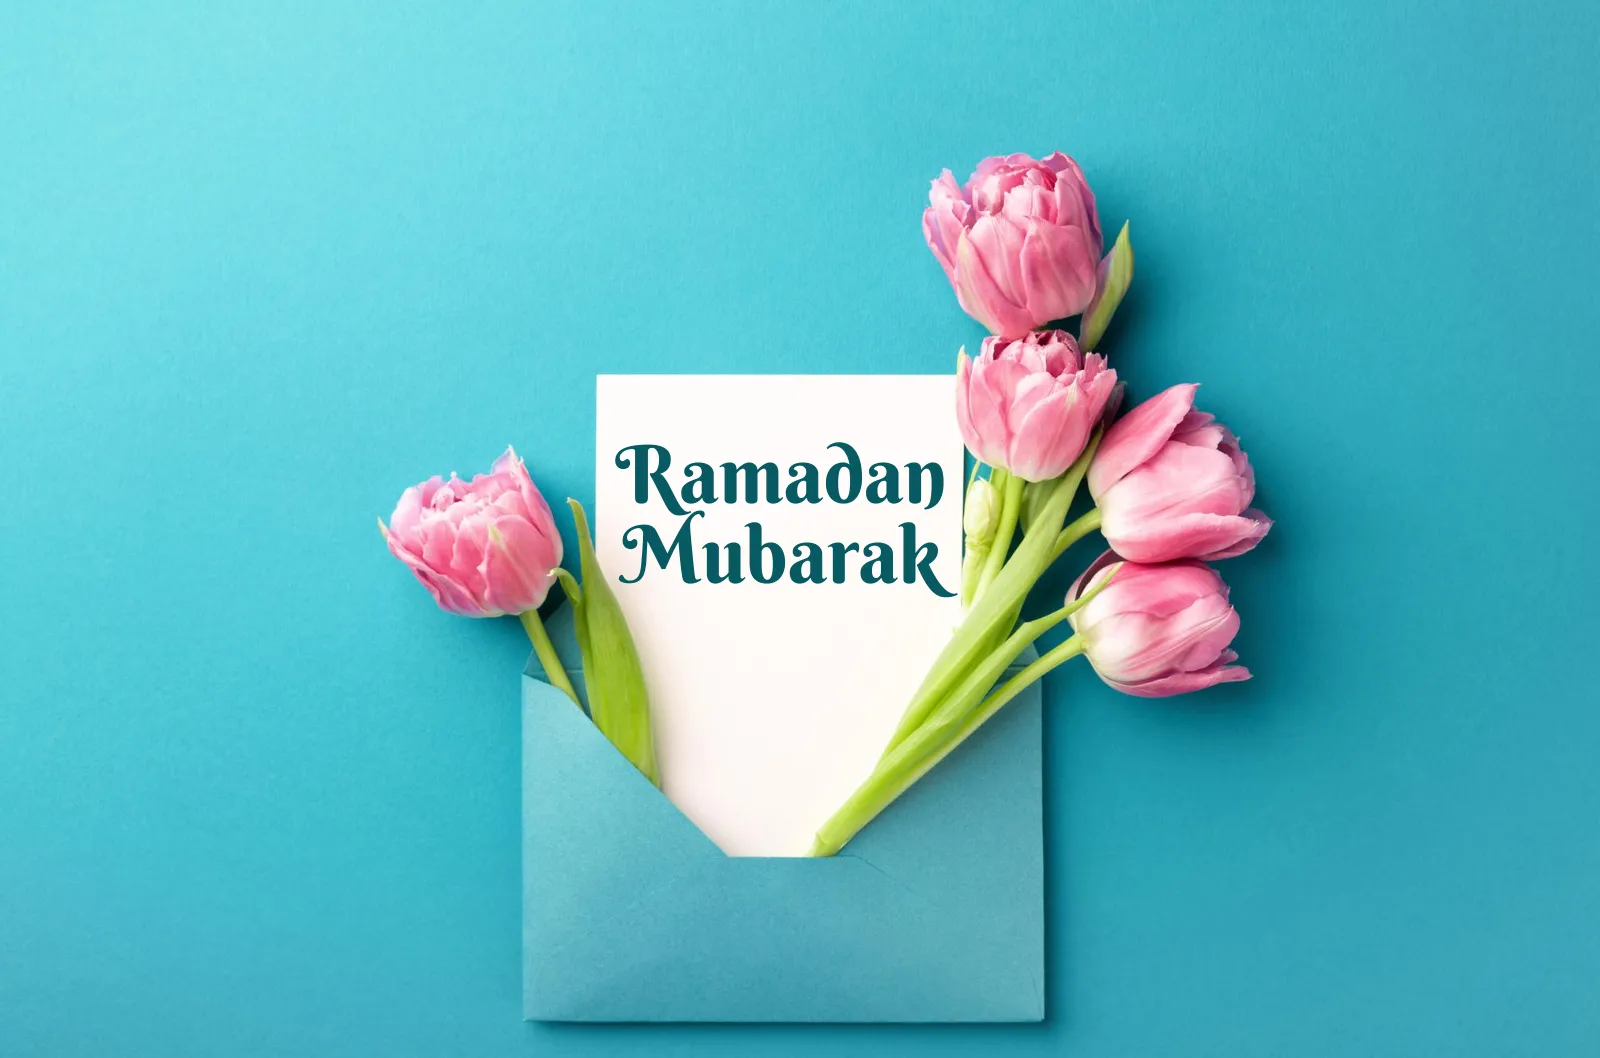 Ramadan Mubarak written on a white paper which is presented with pink tulips.